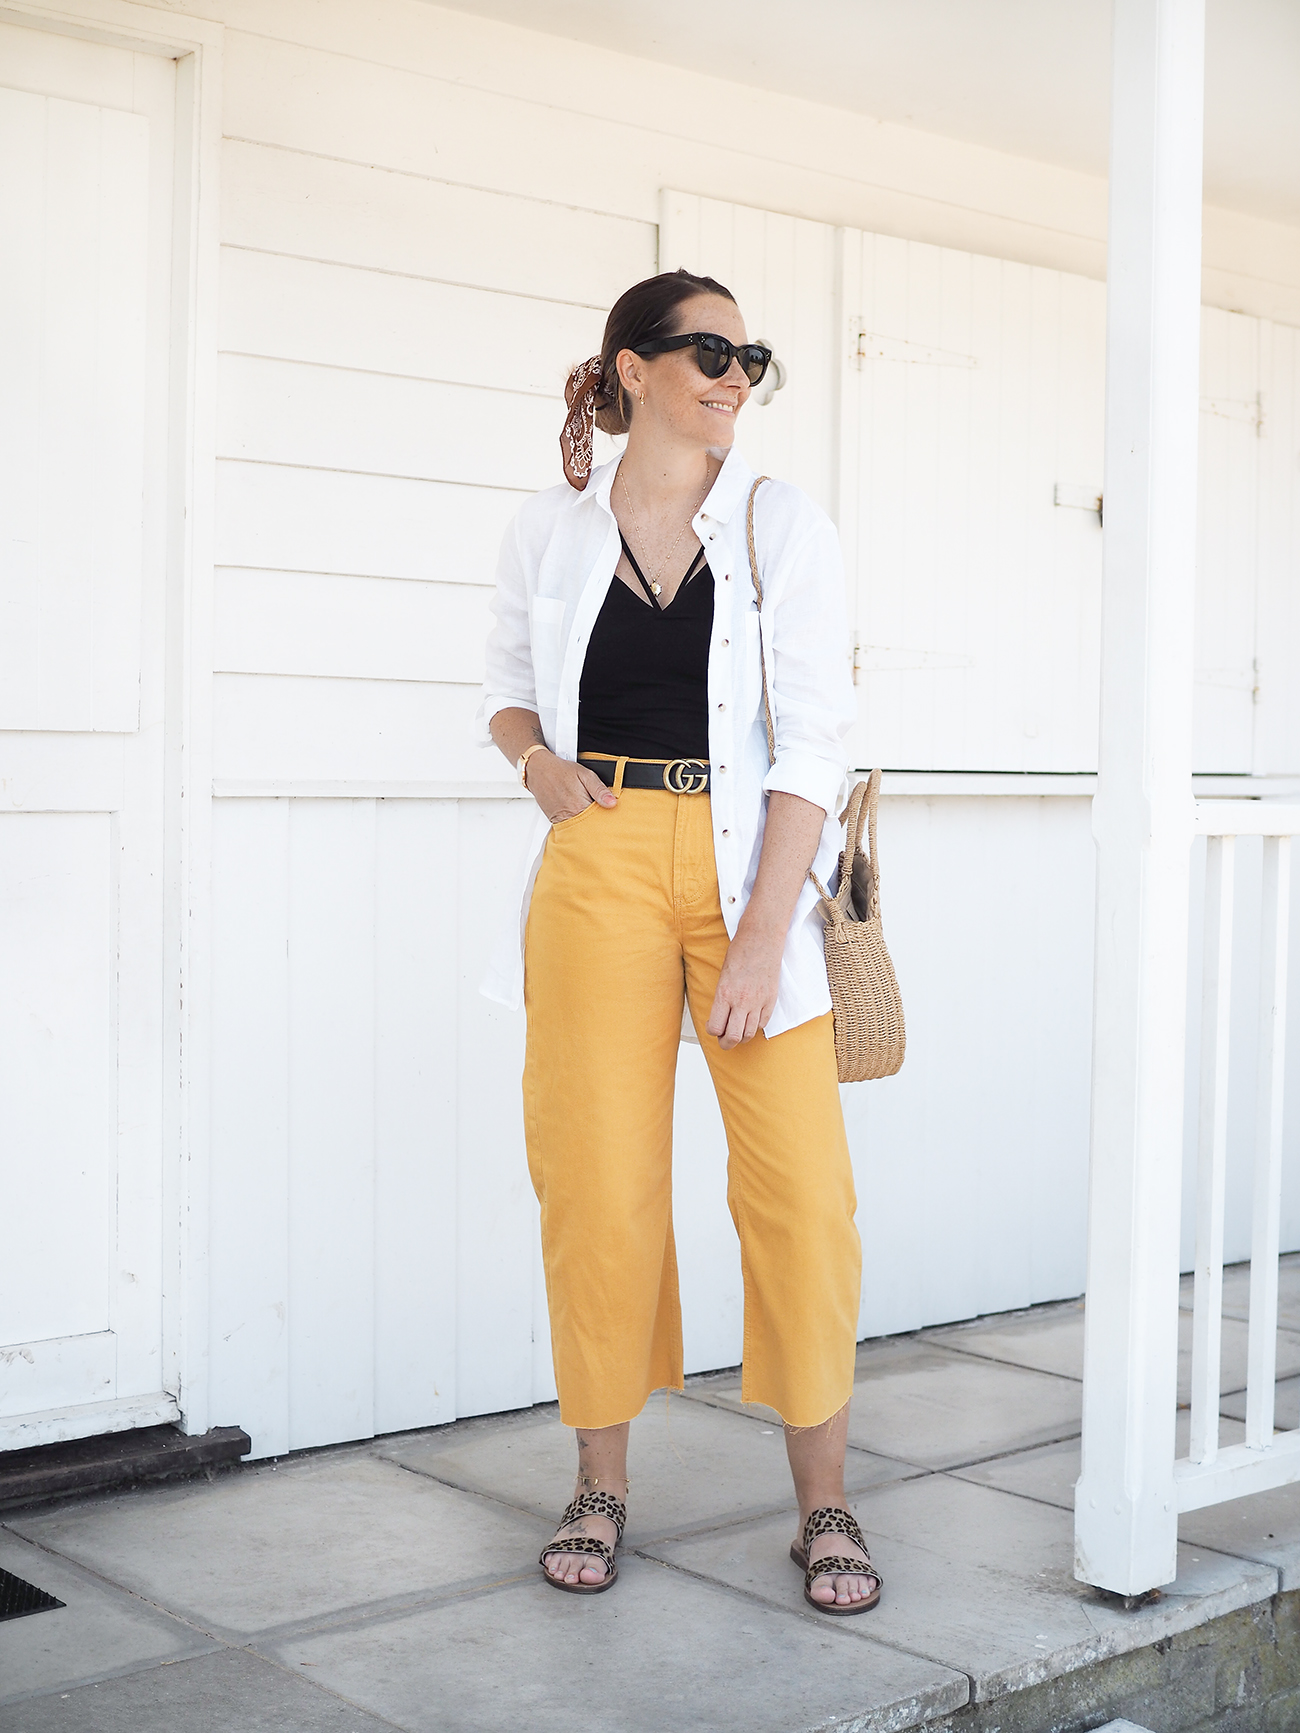 primark haul linen shirt and mustard jeans outfit